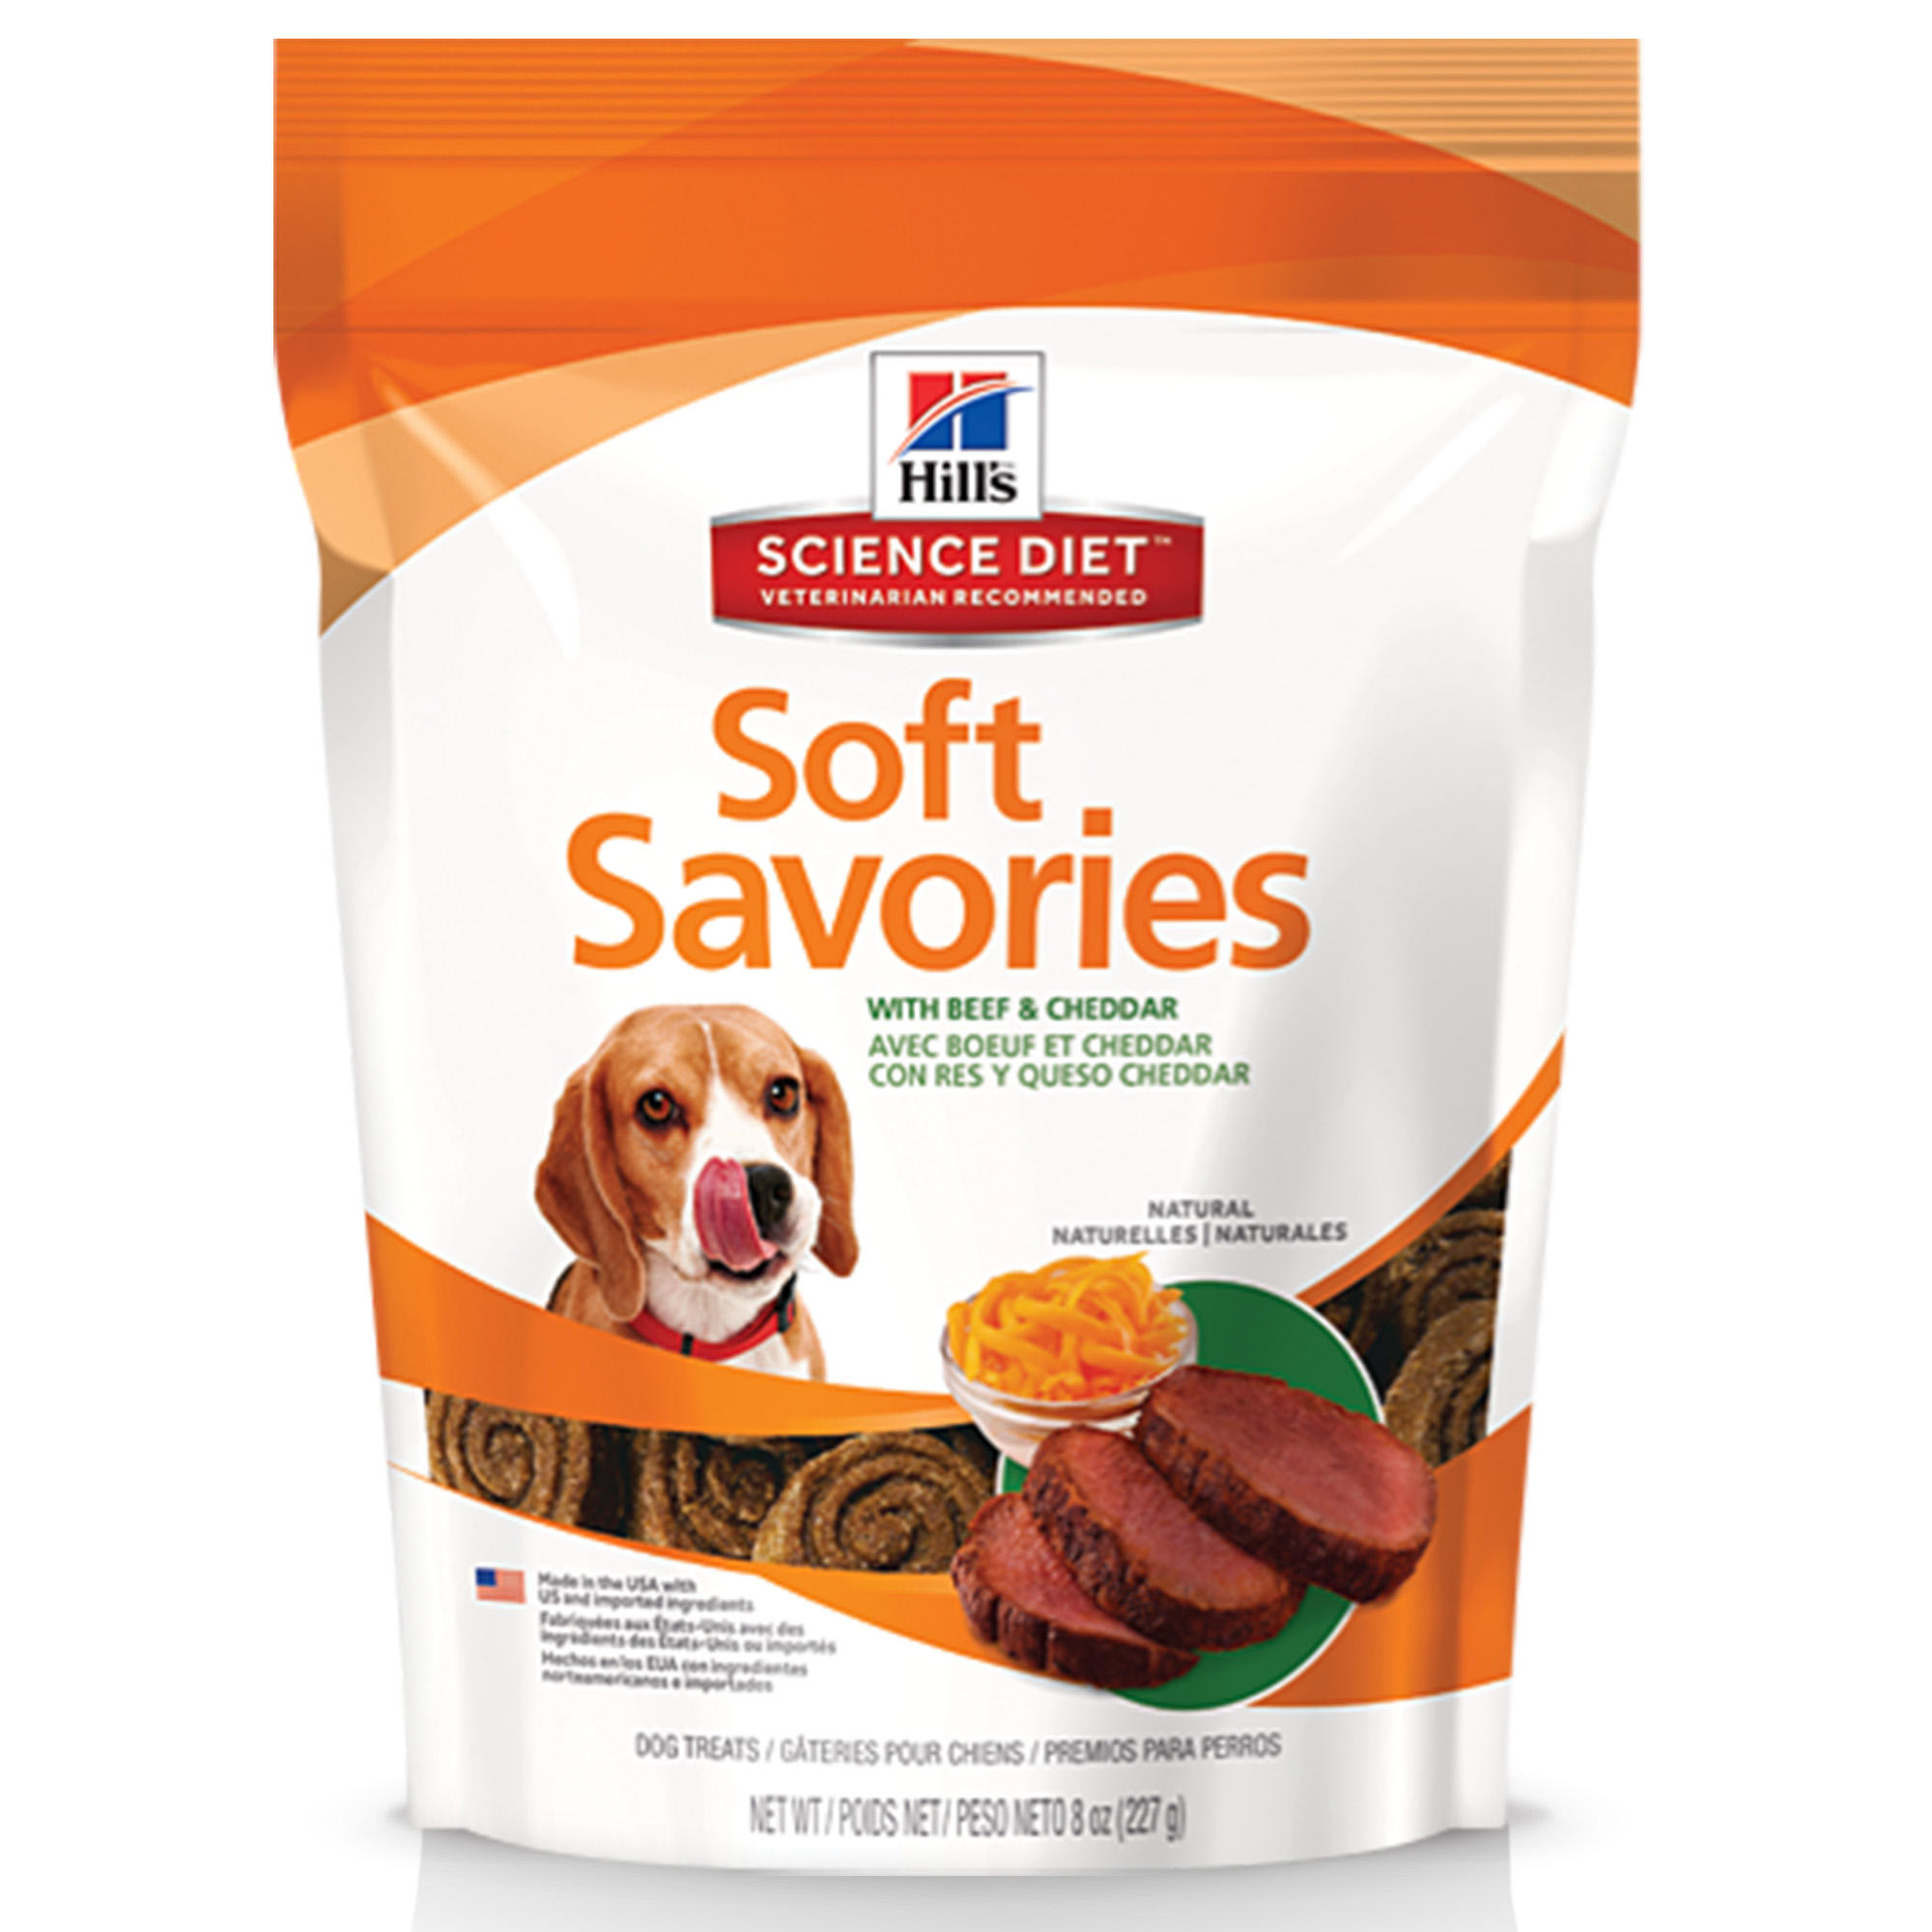 Photos - Dog Food Hills Hill's Hill's Natural Soft Savory Dog Treats with Beef & Cheddar, 8 oz., B 